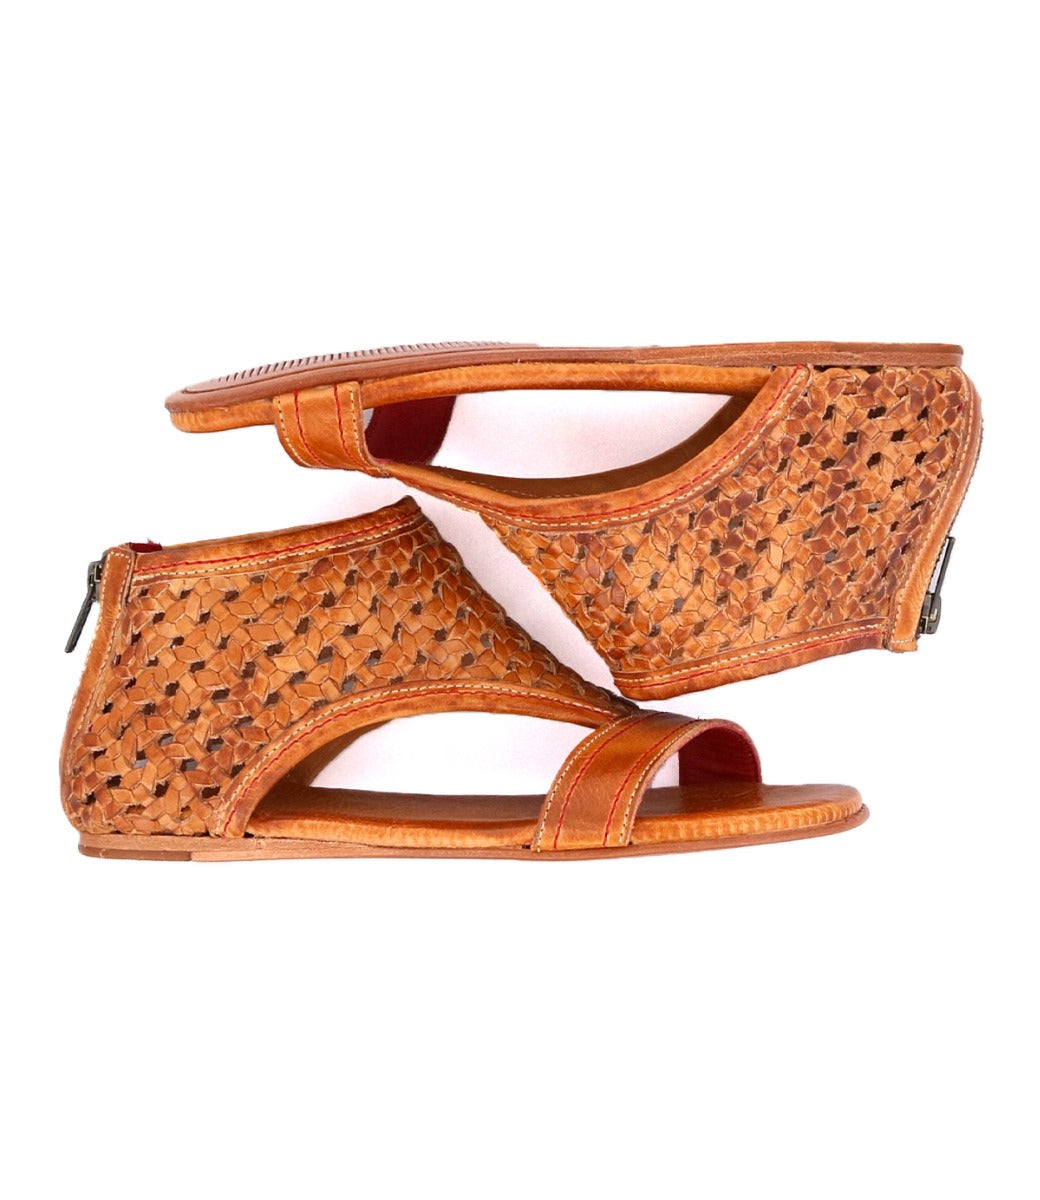 A pair of Kimberly women's sandals in tan by Bed Stu.